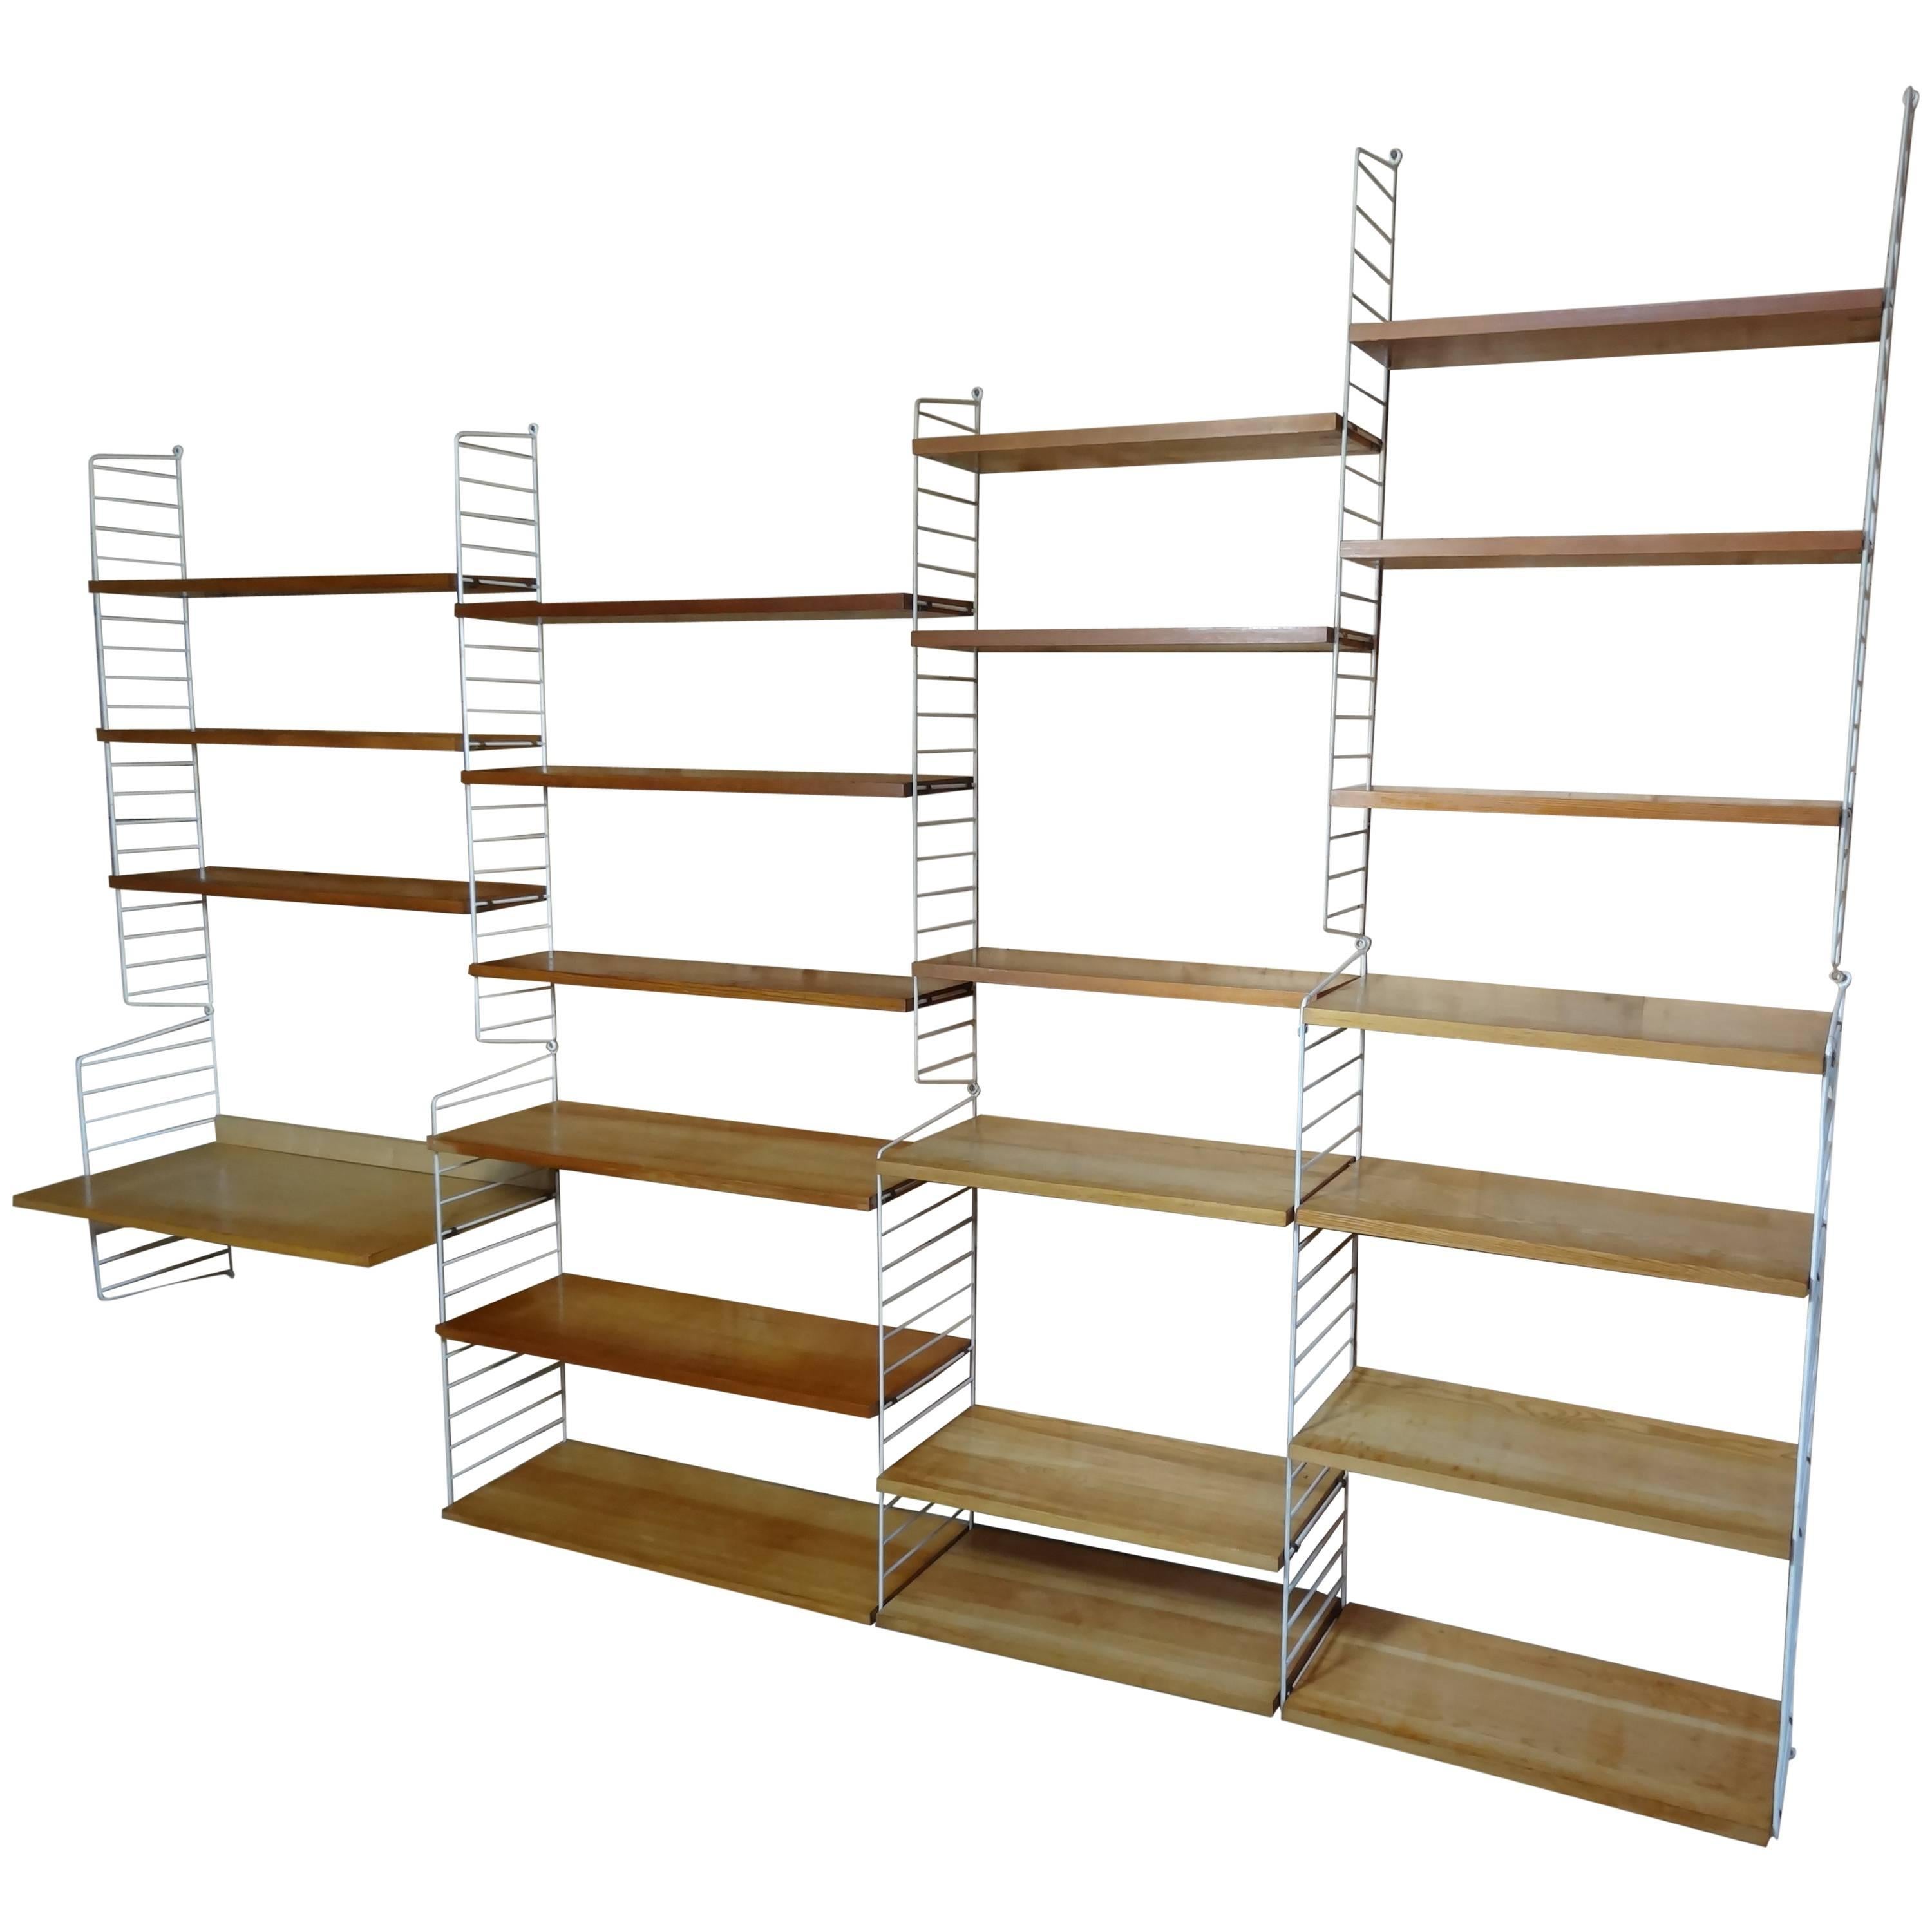 XXL String 1950s Wall Shelving Unit with 22 Shelves and a Desk